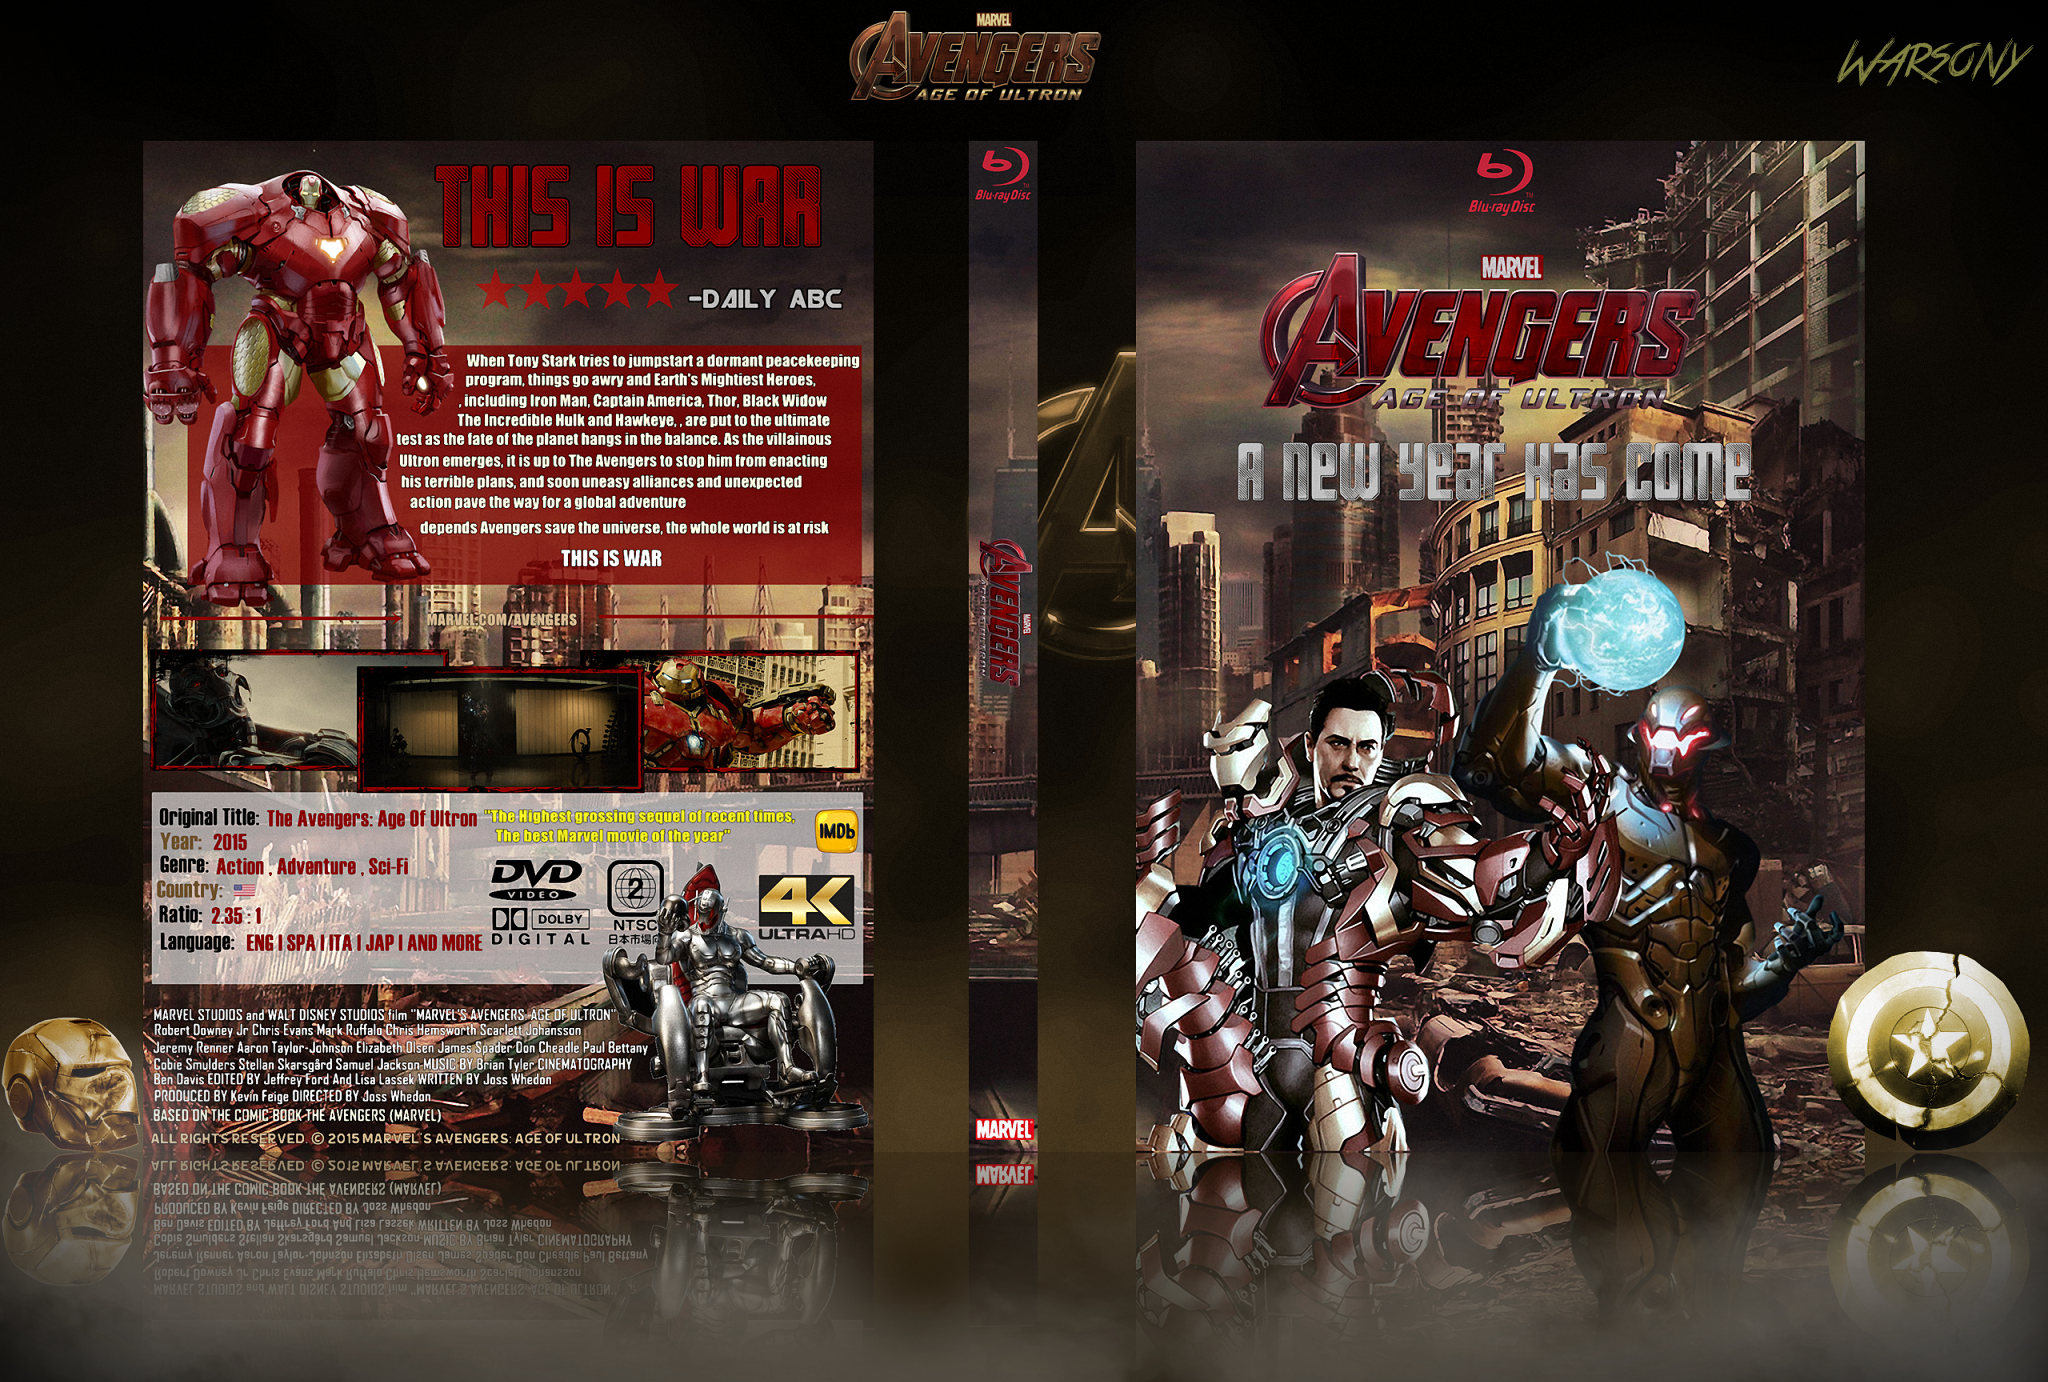 Marvel's Avengers: Age Of Ultron box cover